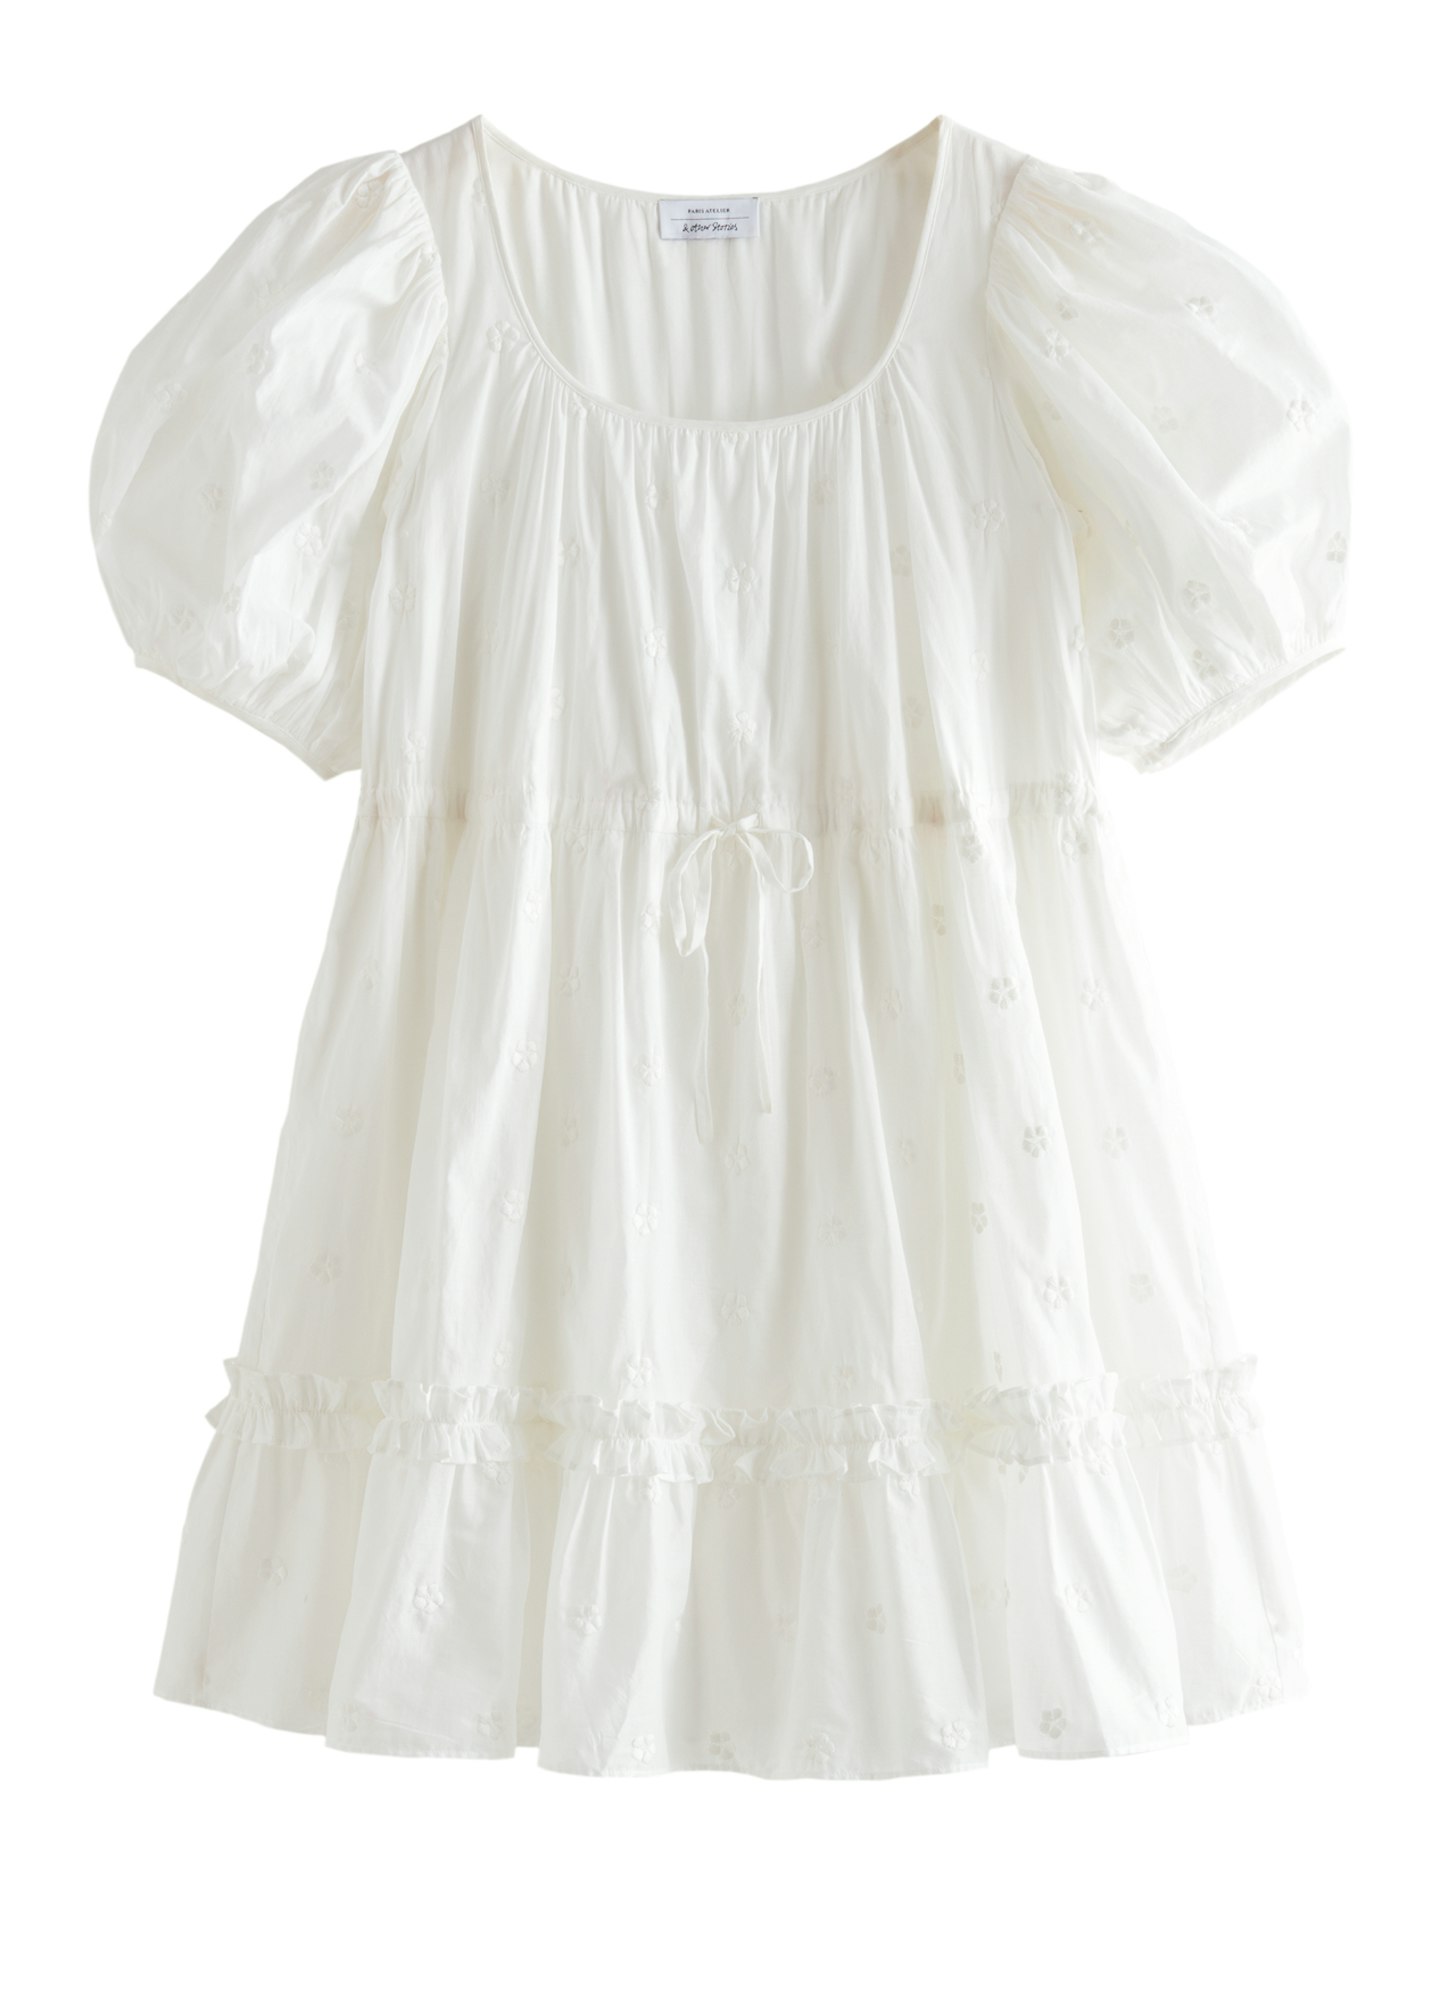 & Other Stories, Tiered Puff-Sleeve Mini Dress, £85